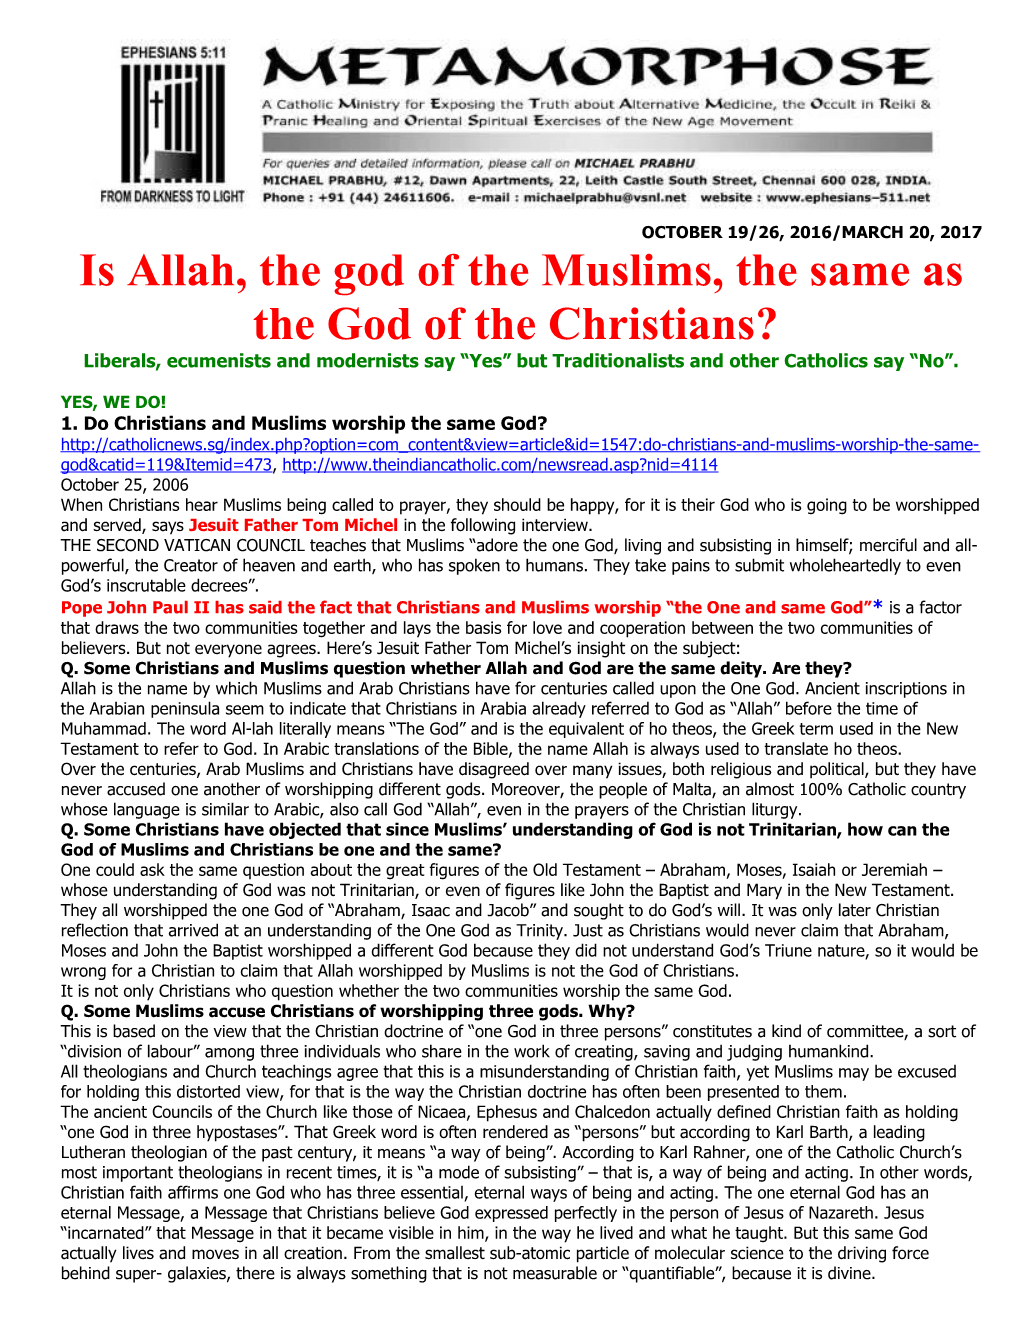 Is Allah, the God of the Muslims, the Same As the God of the Christians?